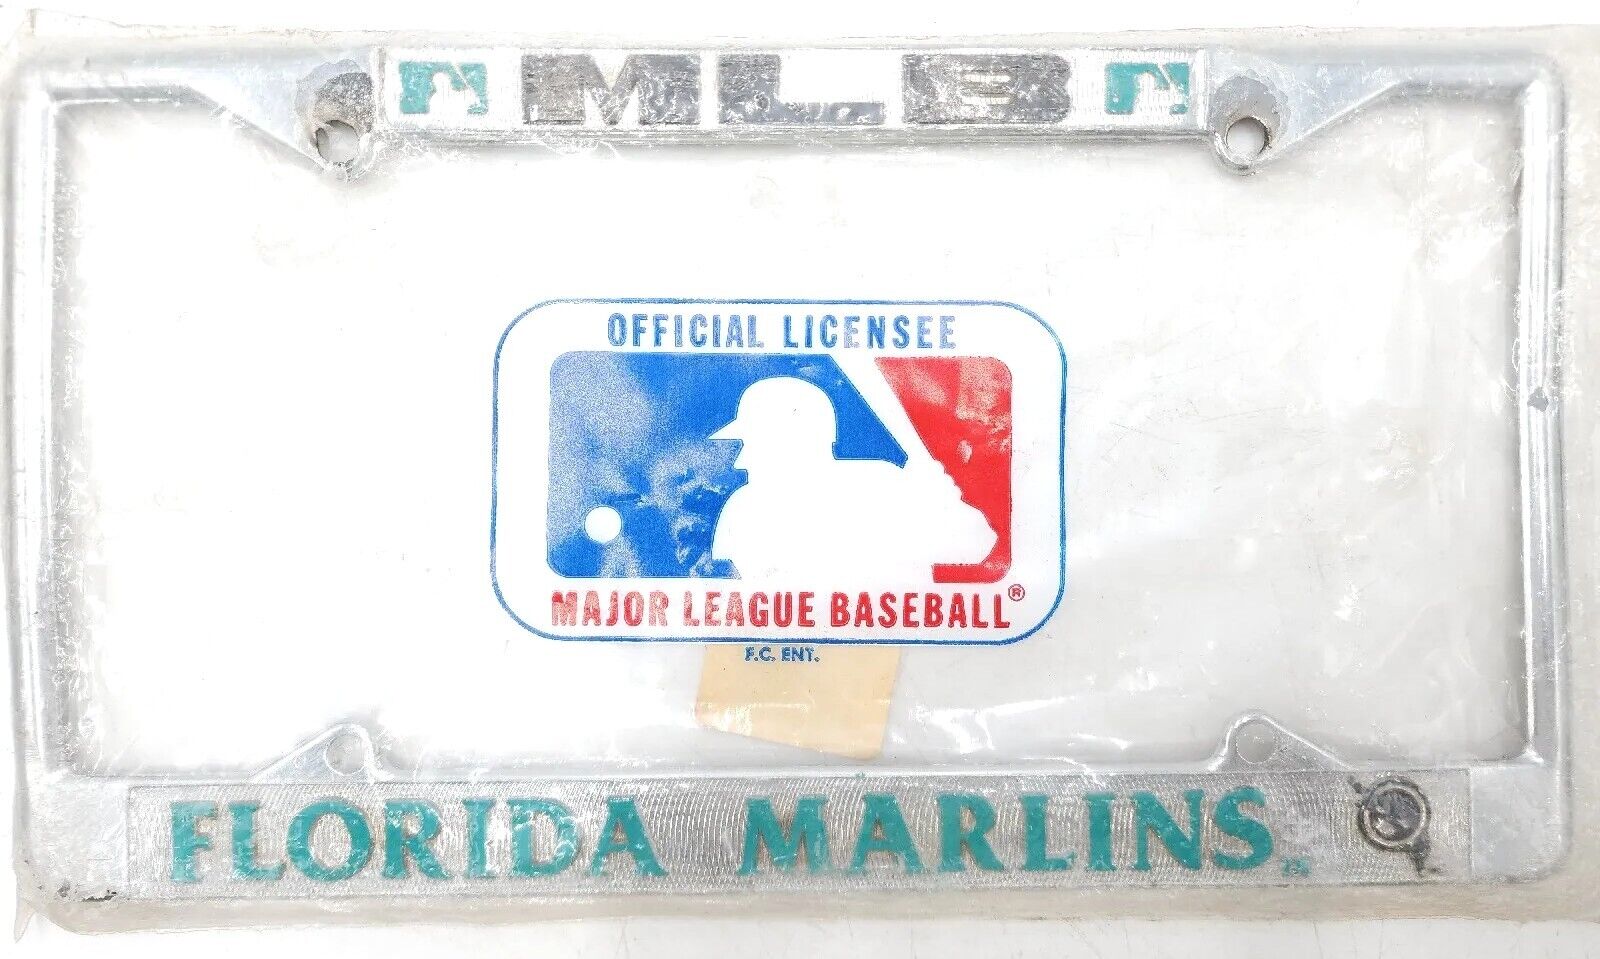 Official Licensee MLB Miami Florida Marlins License Plate Frame Chrome Metal